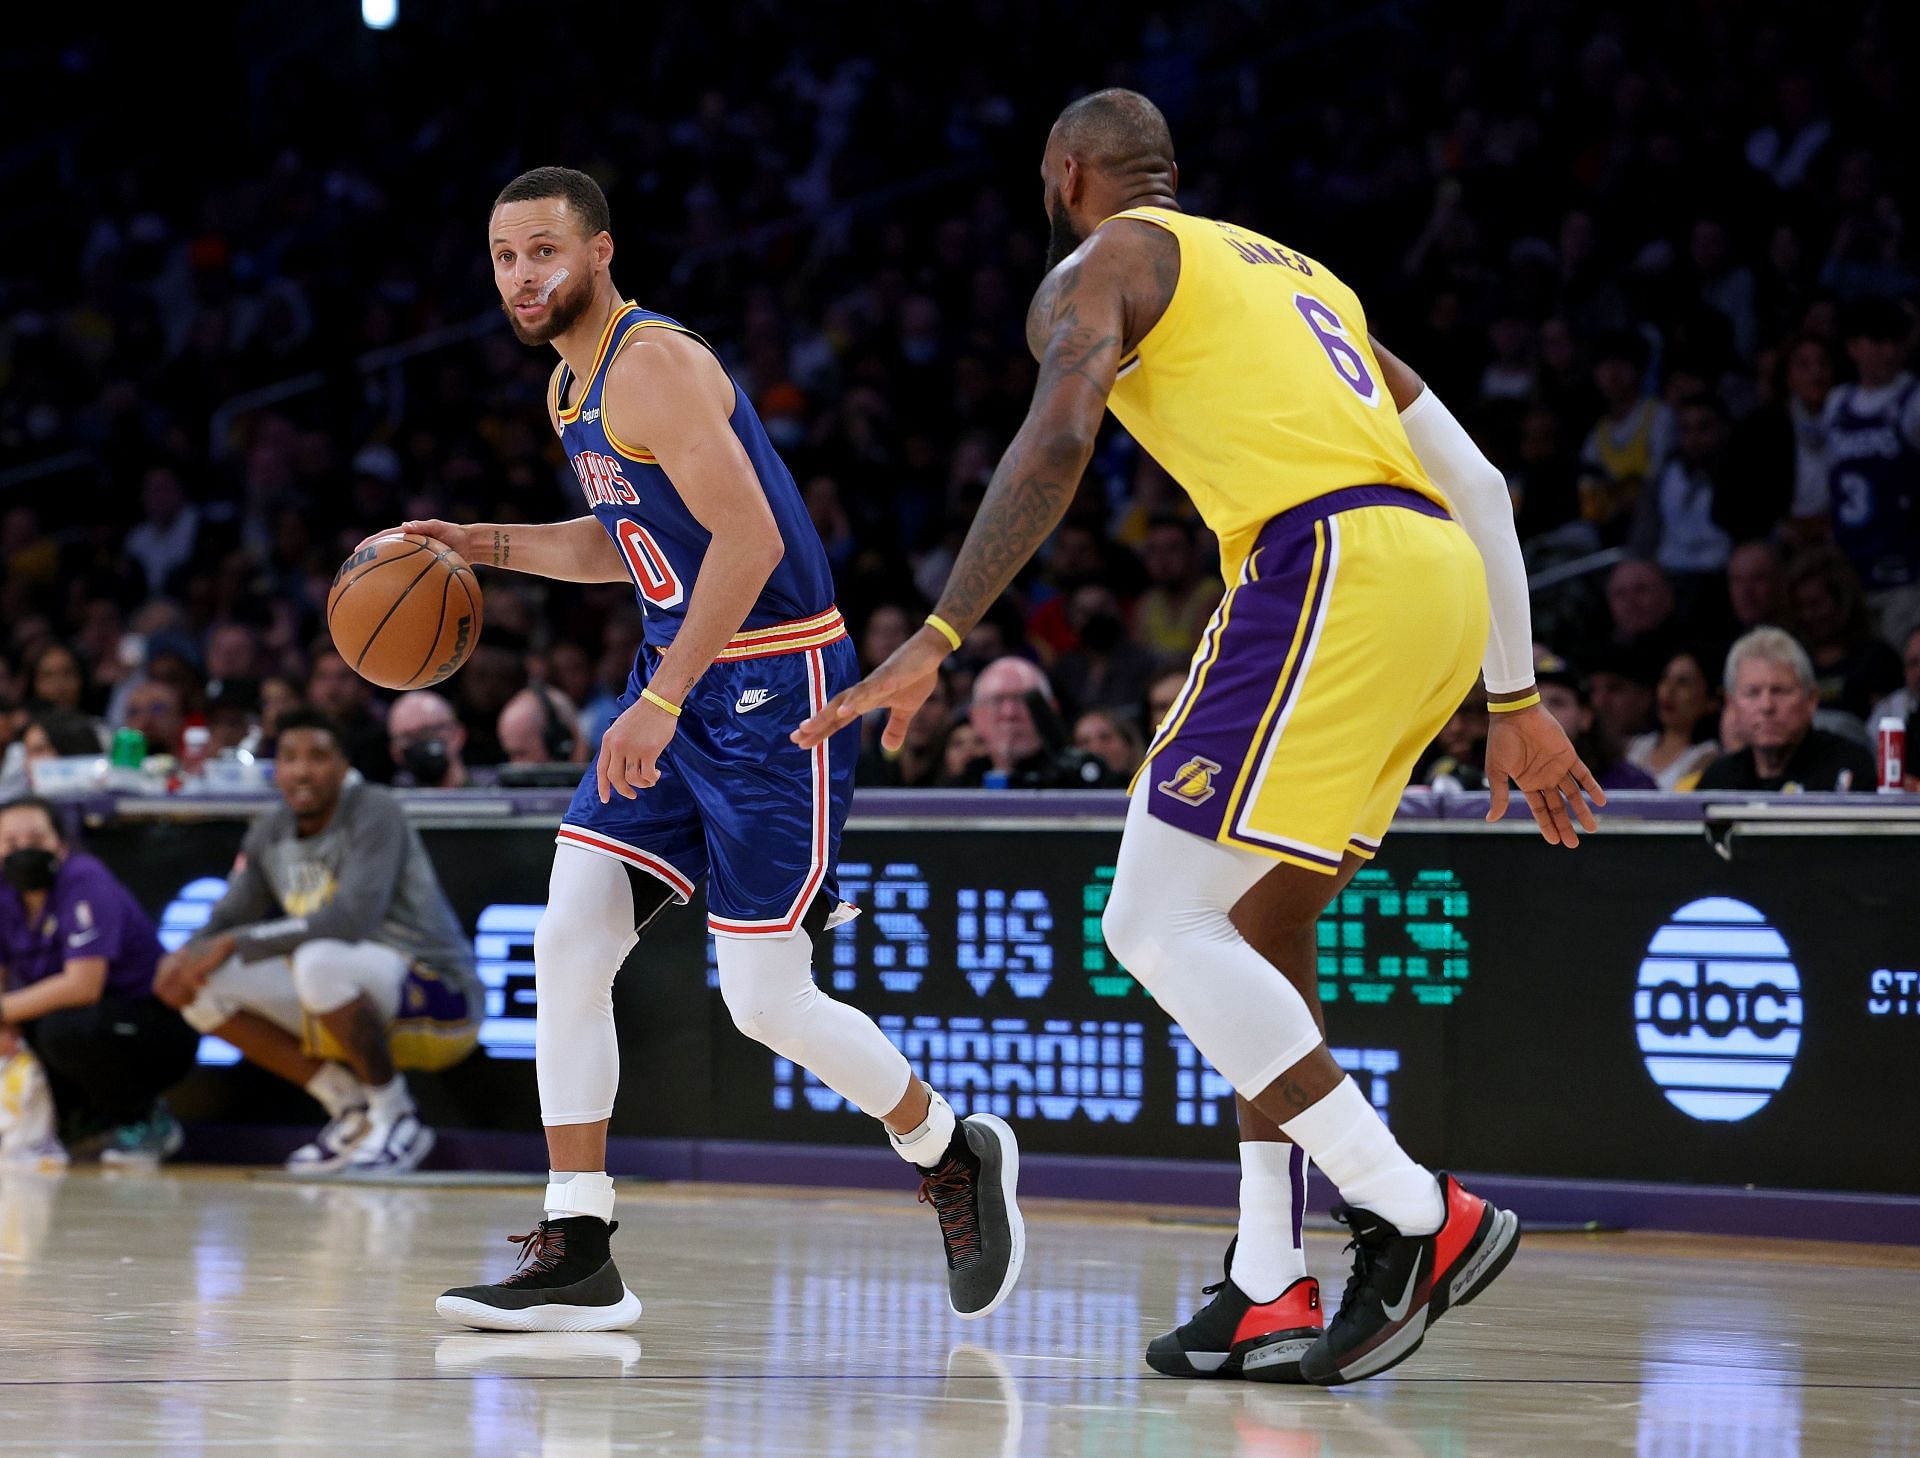 Stephen Curry of the Golden State Warriors dribbles in front of LeBron James.